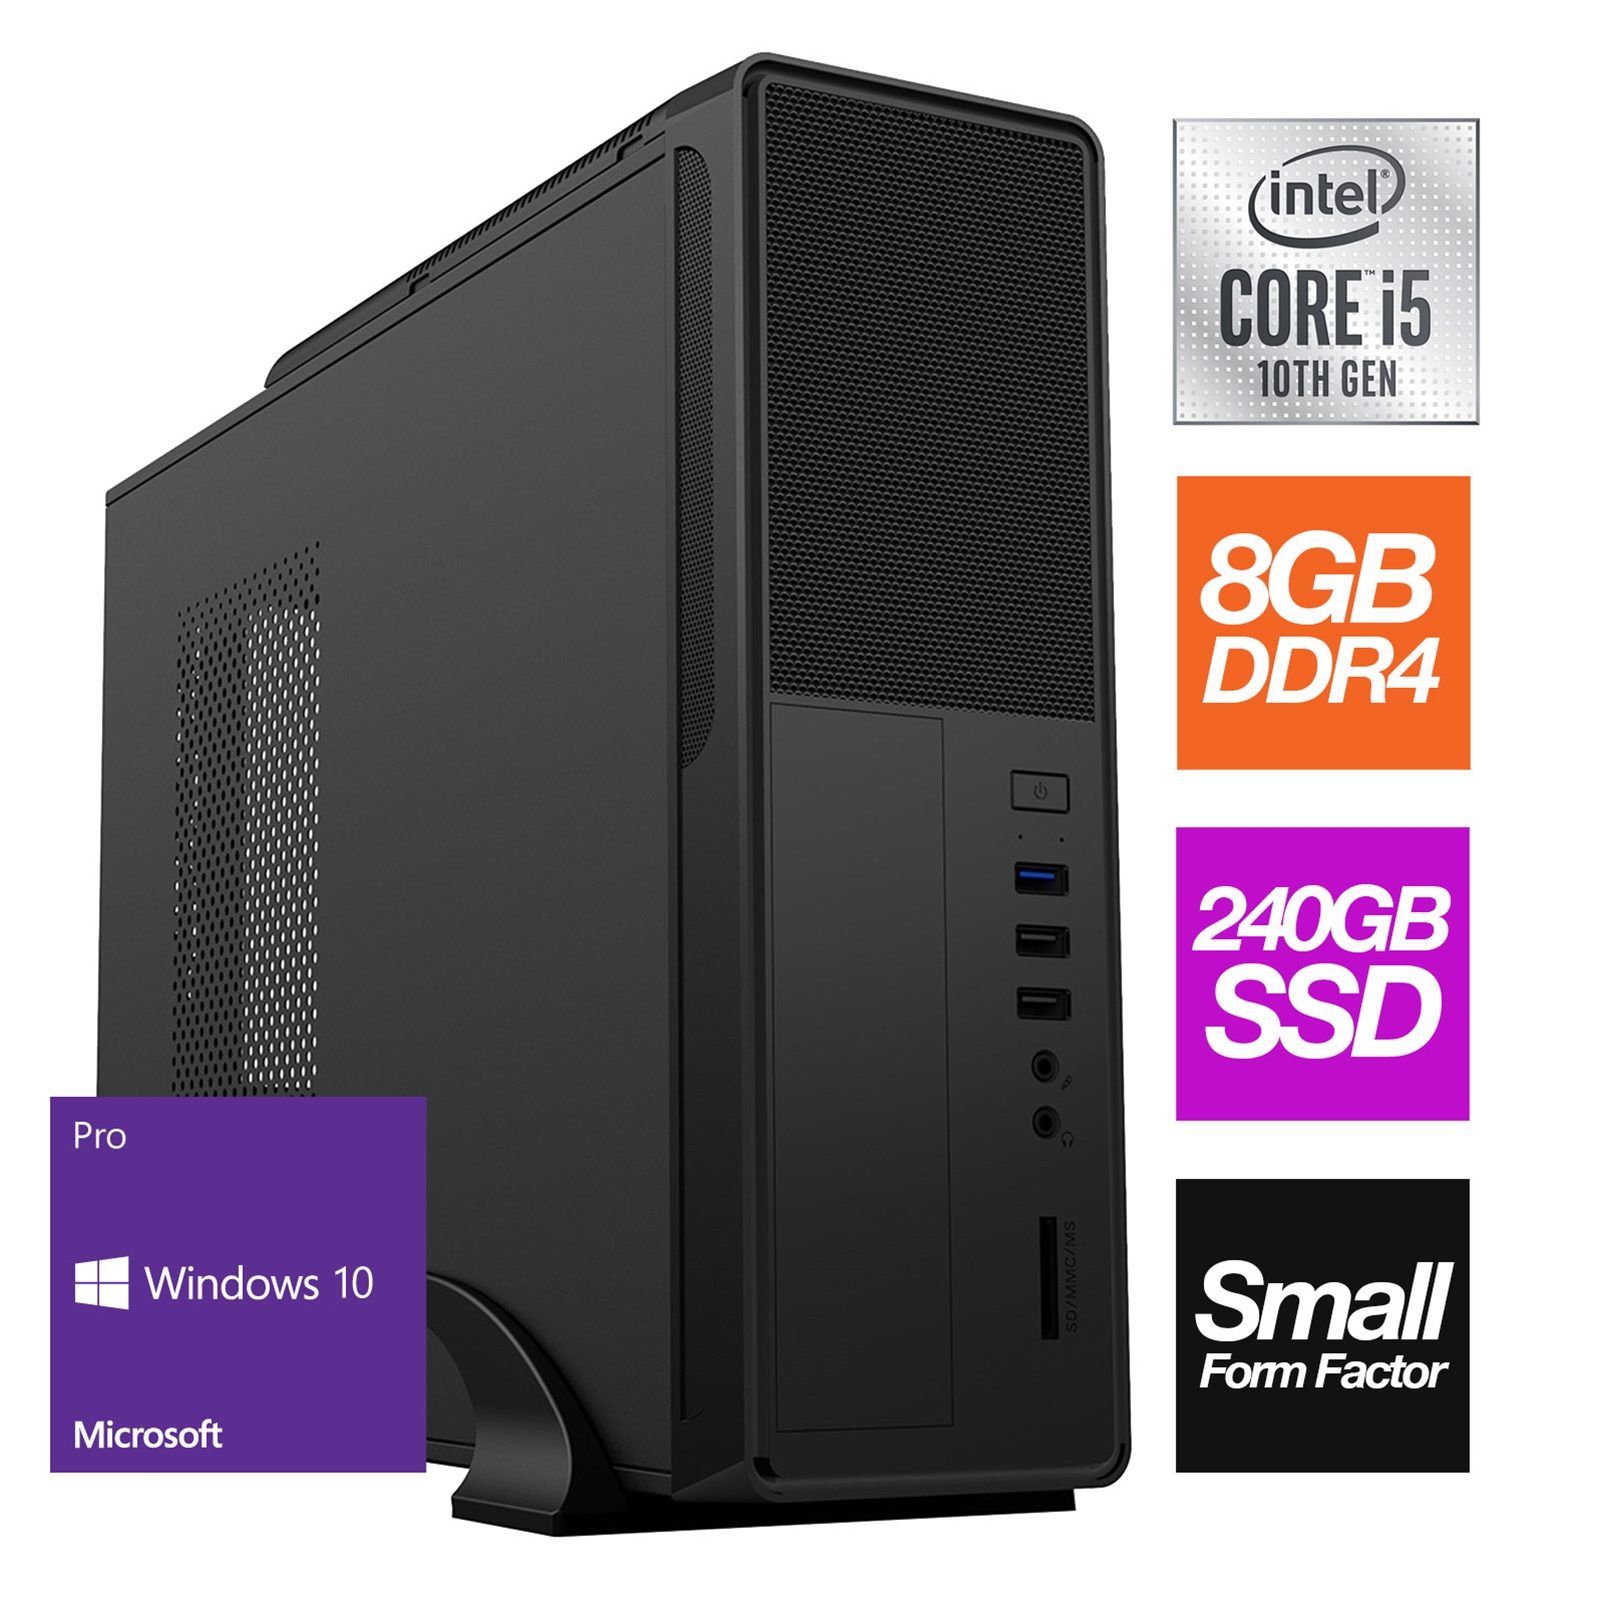 Small Form Factor - Intel i5 10400 6 Core 12 Threads 2.90GHz (4.30GHz Boost), 8GB RAM, 240GB SSD, No Optical, with Windows 10 Pro - Small Foot Print for Home or Office Use - Pre-Built PC